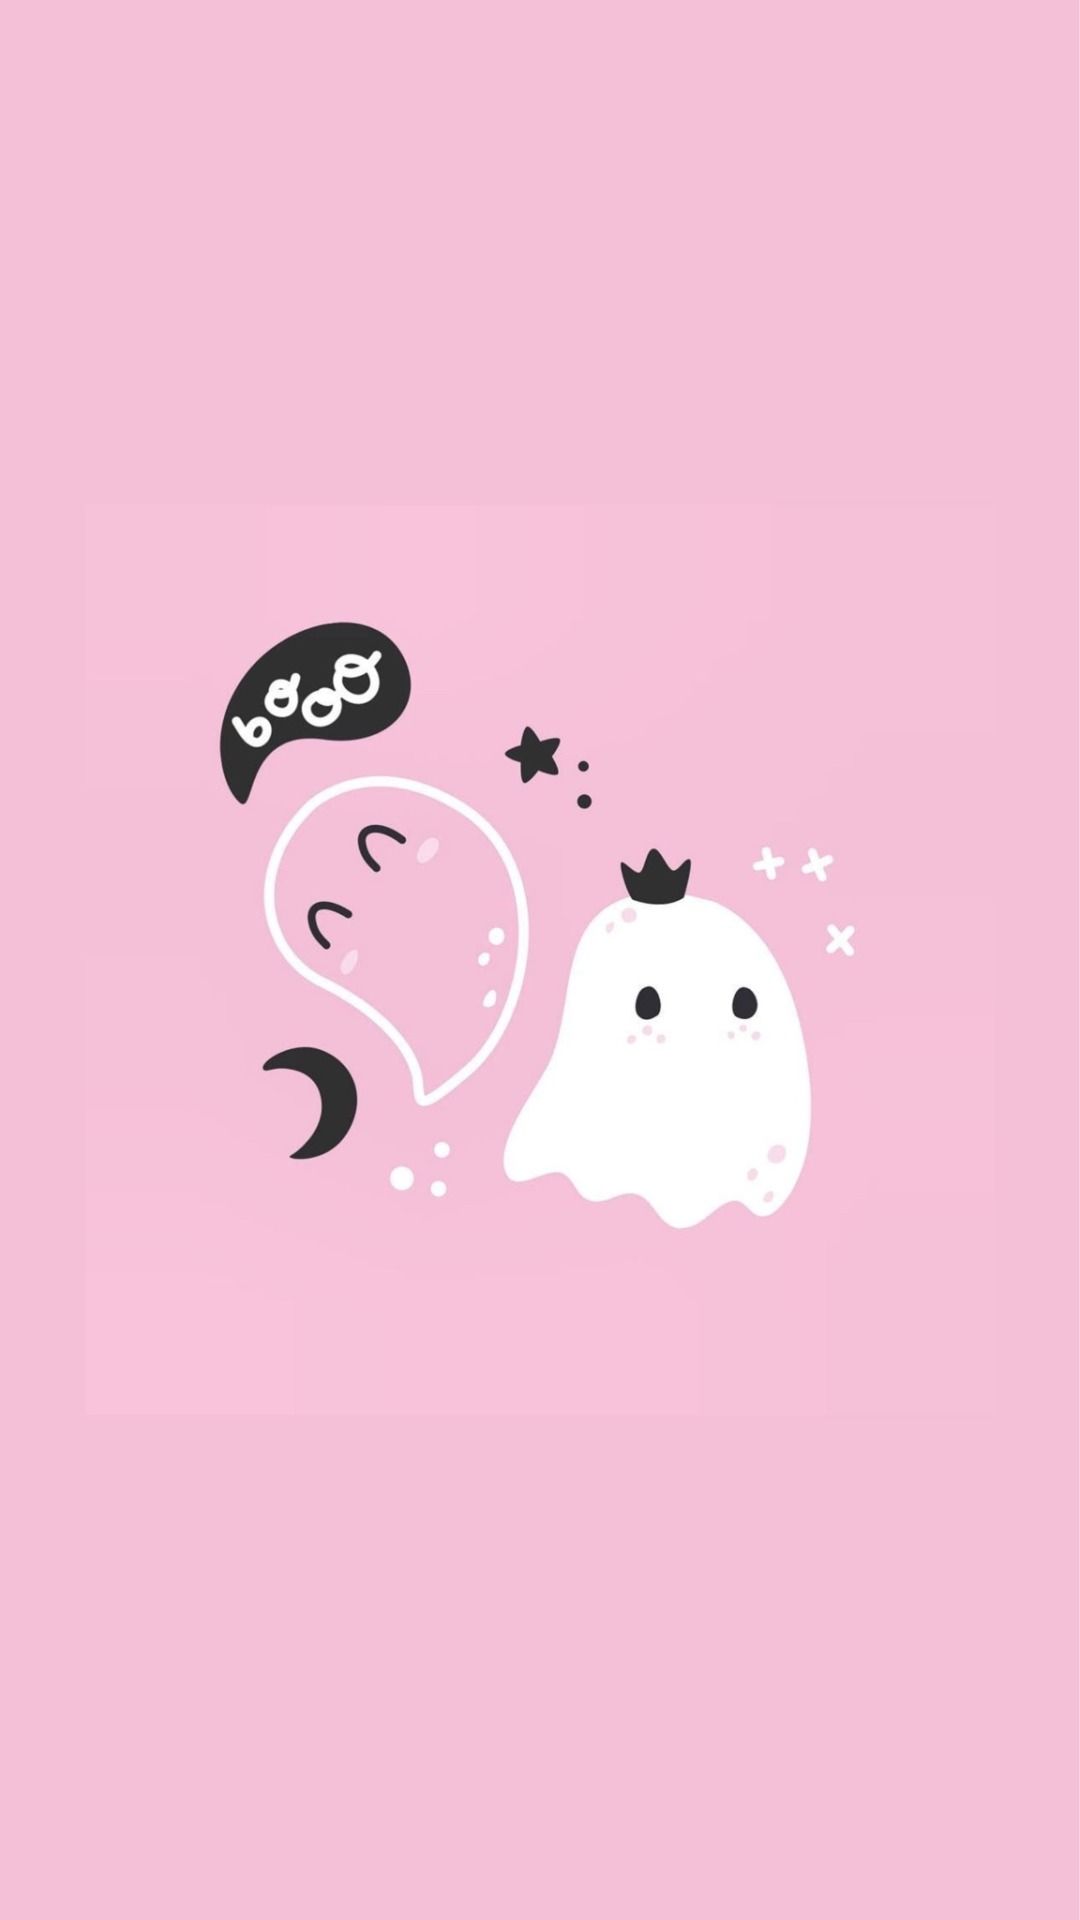 Halloween wallpaper for phone with cute ghosts on a pink background - Ghost